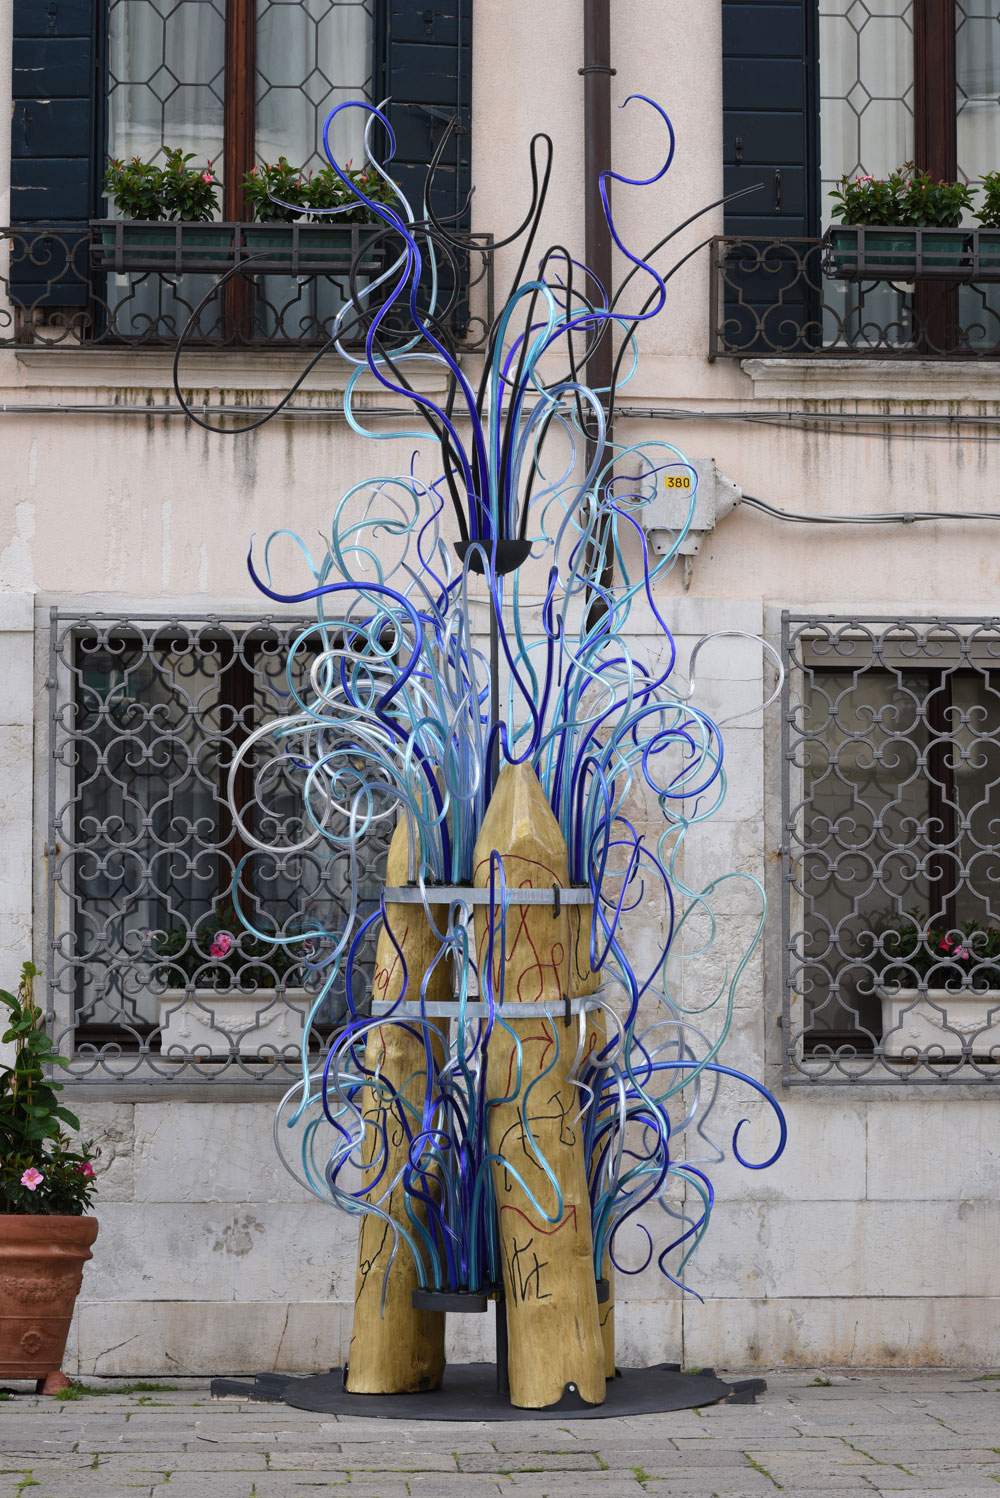 Poetry, a glass garden: Marco Nereo Rotelli's new project for Ca' Sagredo